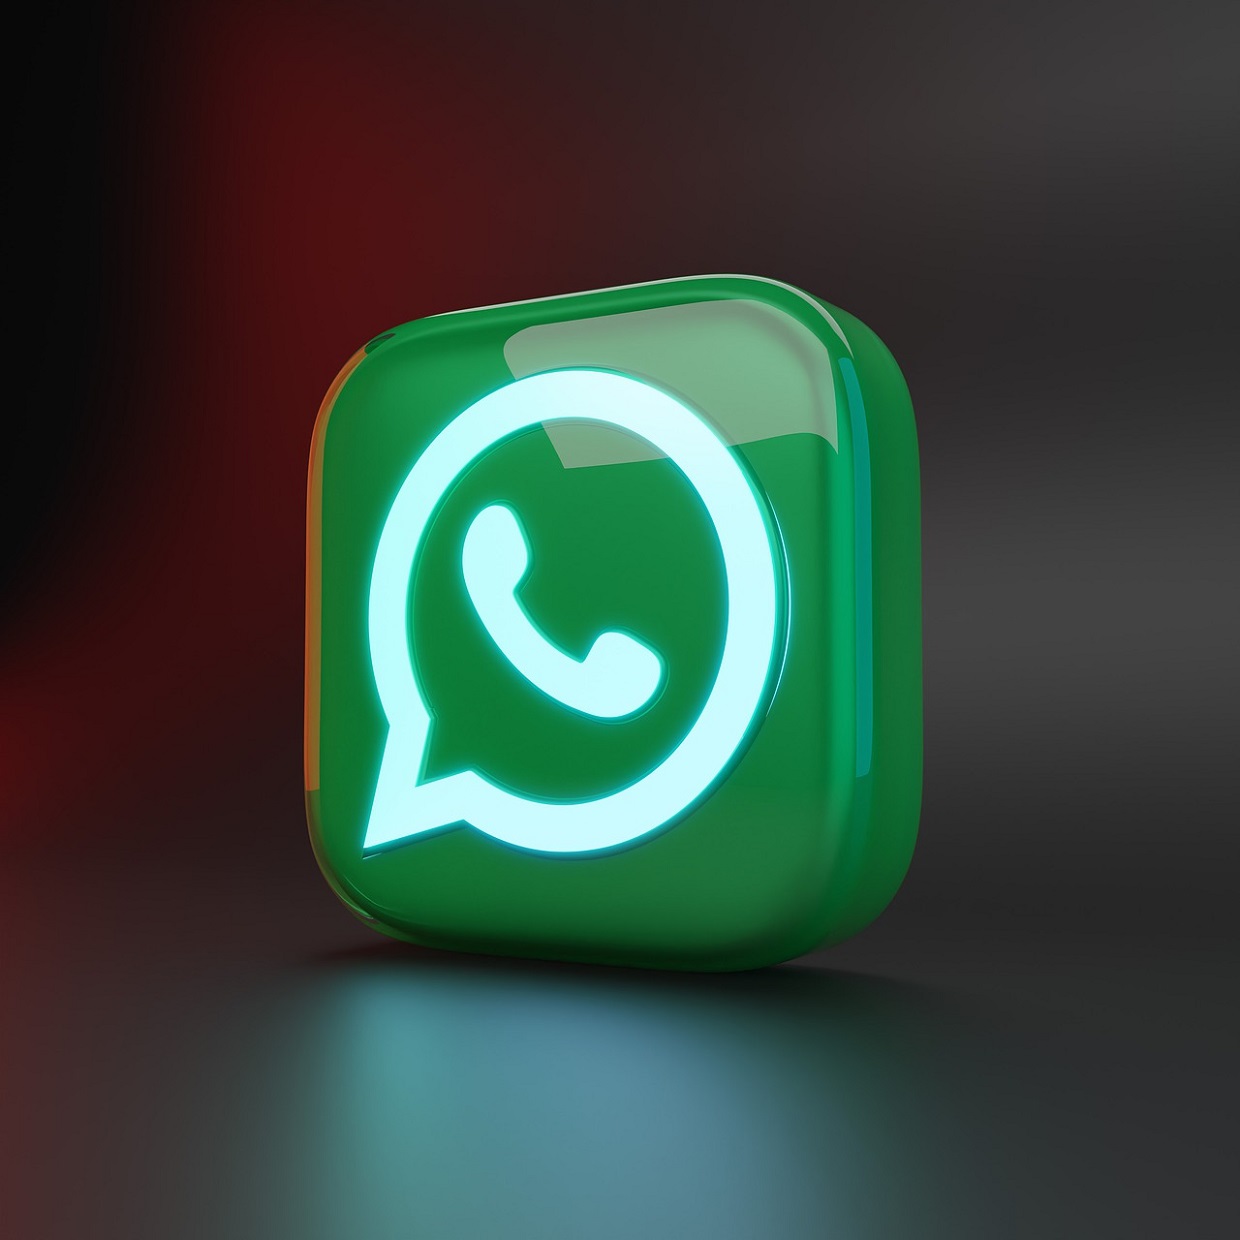 This way you can send photos with the highest quality via Whatsapp